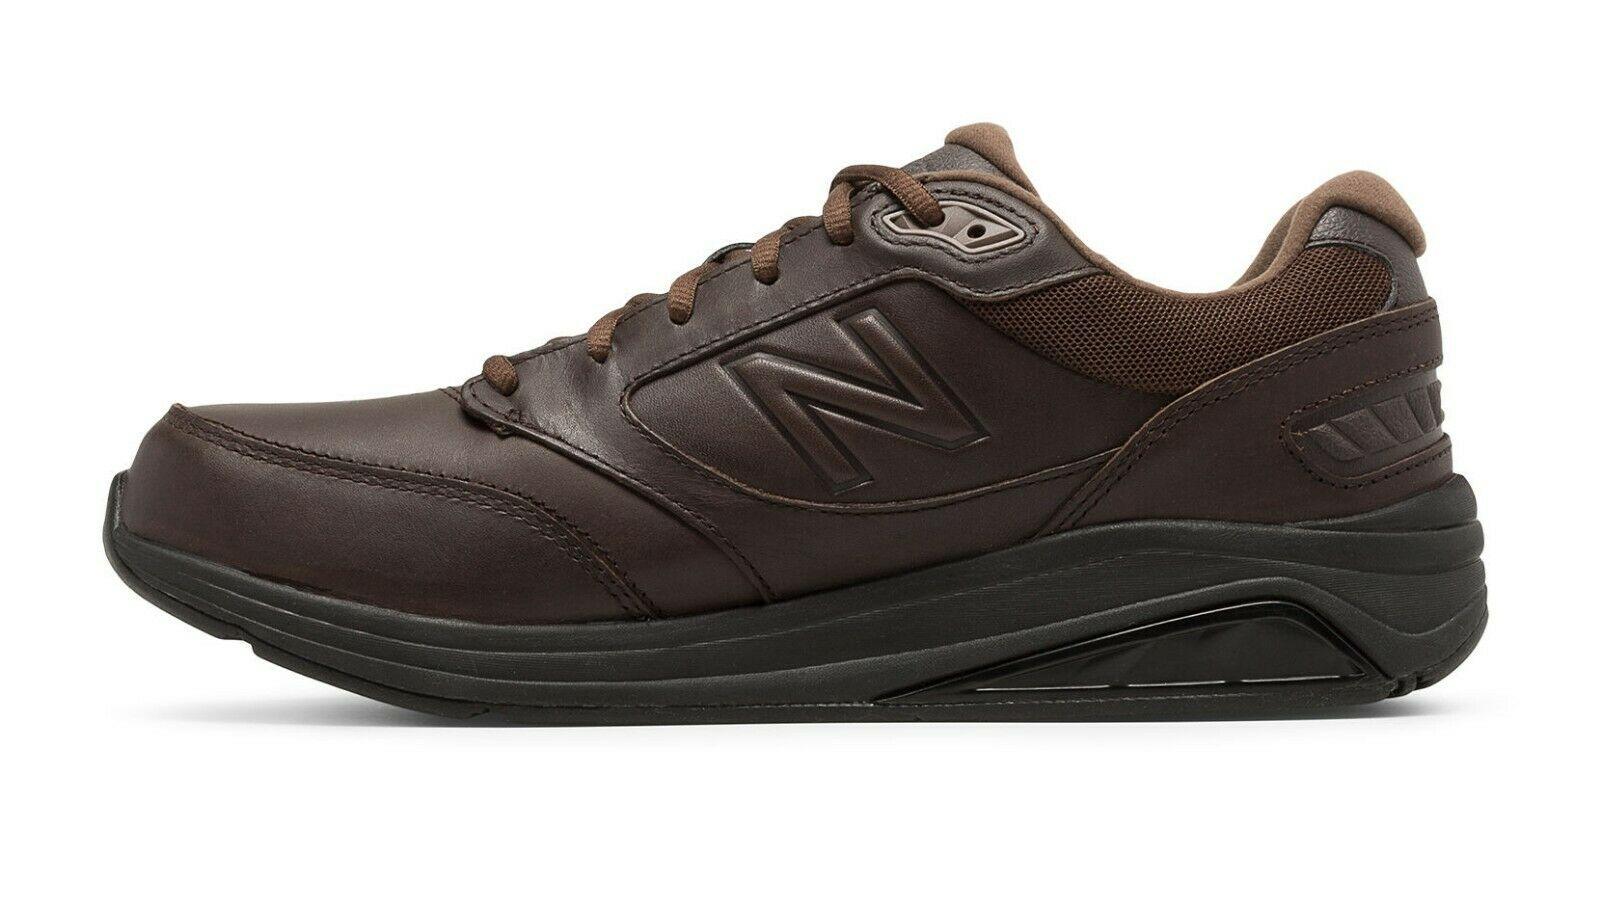 New Balance Mens Leather MW928BR2 Brown Walking Shoes US 9 B  EUR 42.5 Narrow - SVNYFancy